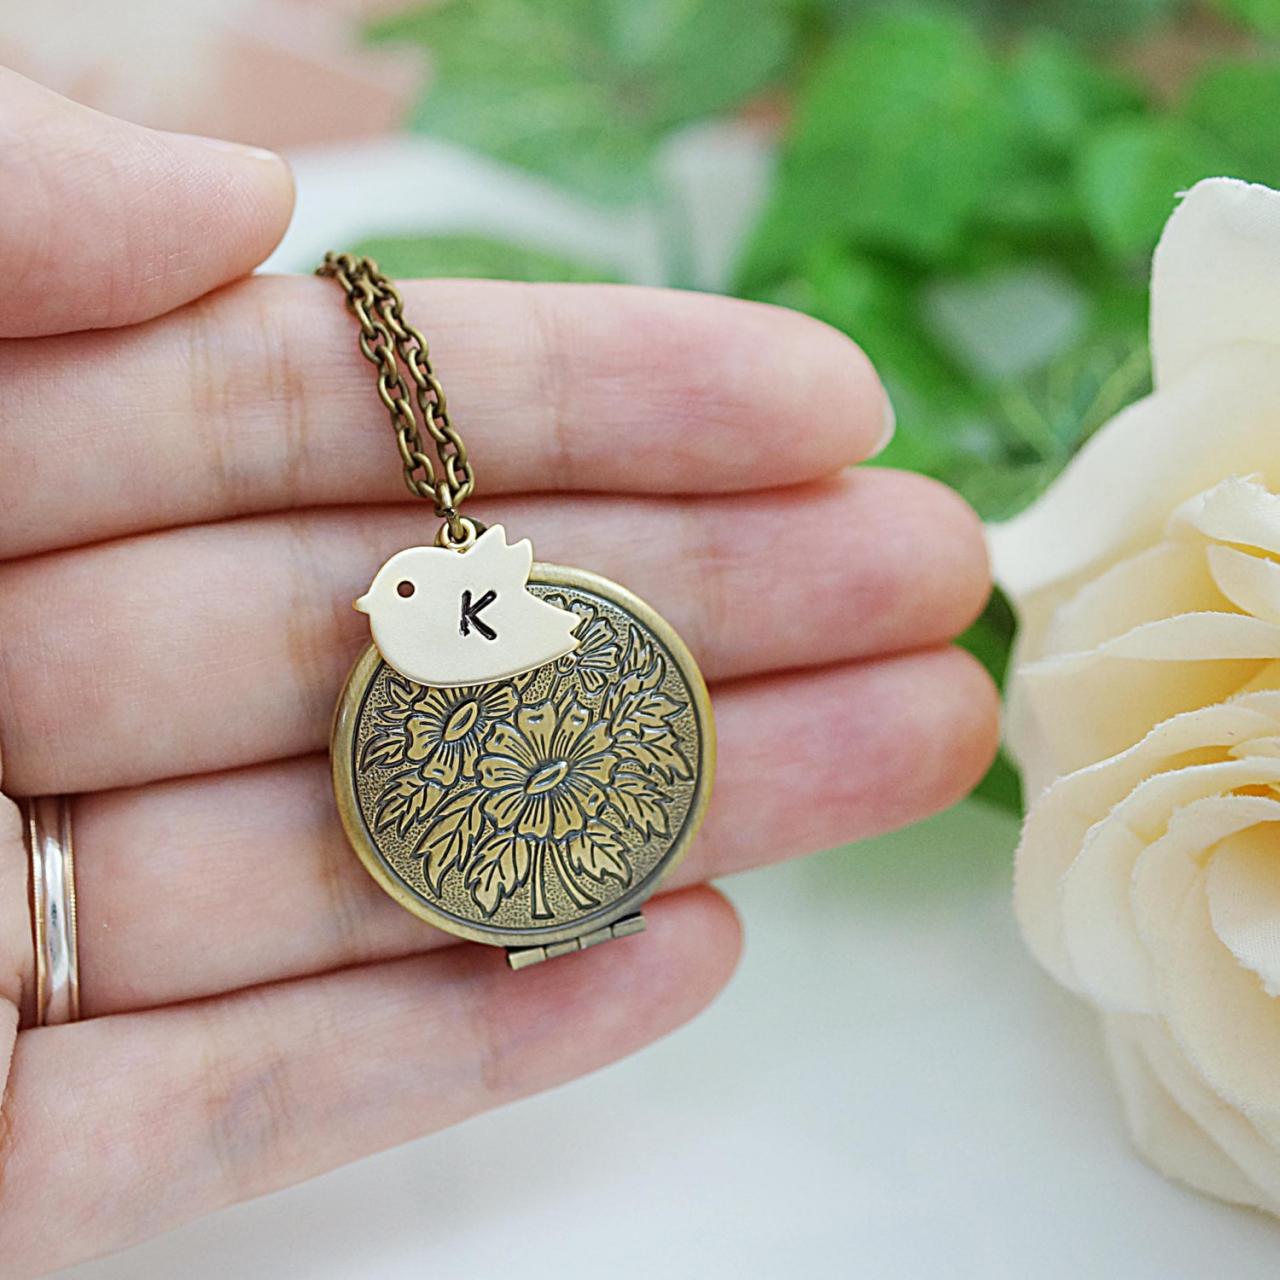 Bridesmaid Gift Bridesmaid Necklace Vintage Style Antique Brass Locket With Personalized Bird Charm Necklace, Christmas Gift For Her